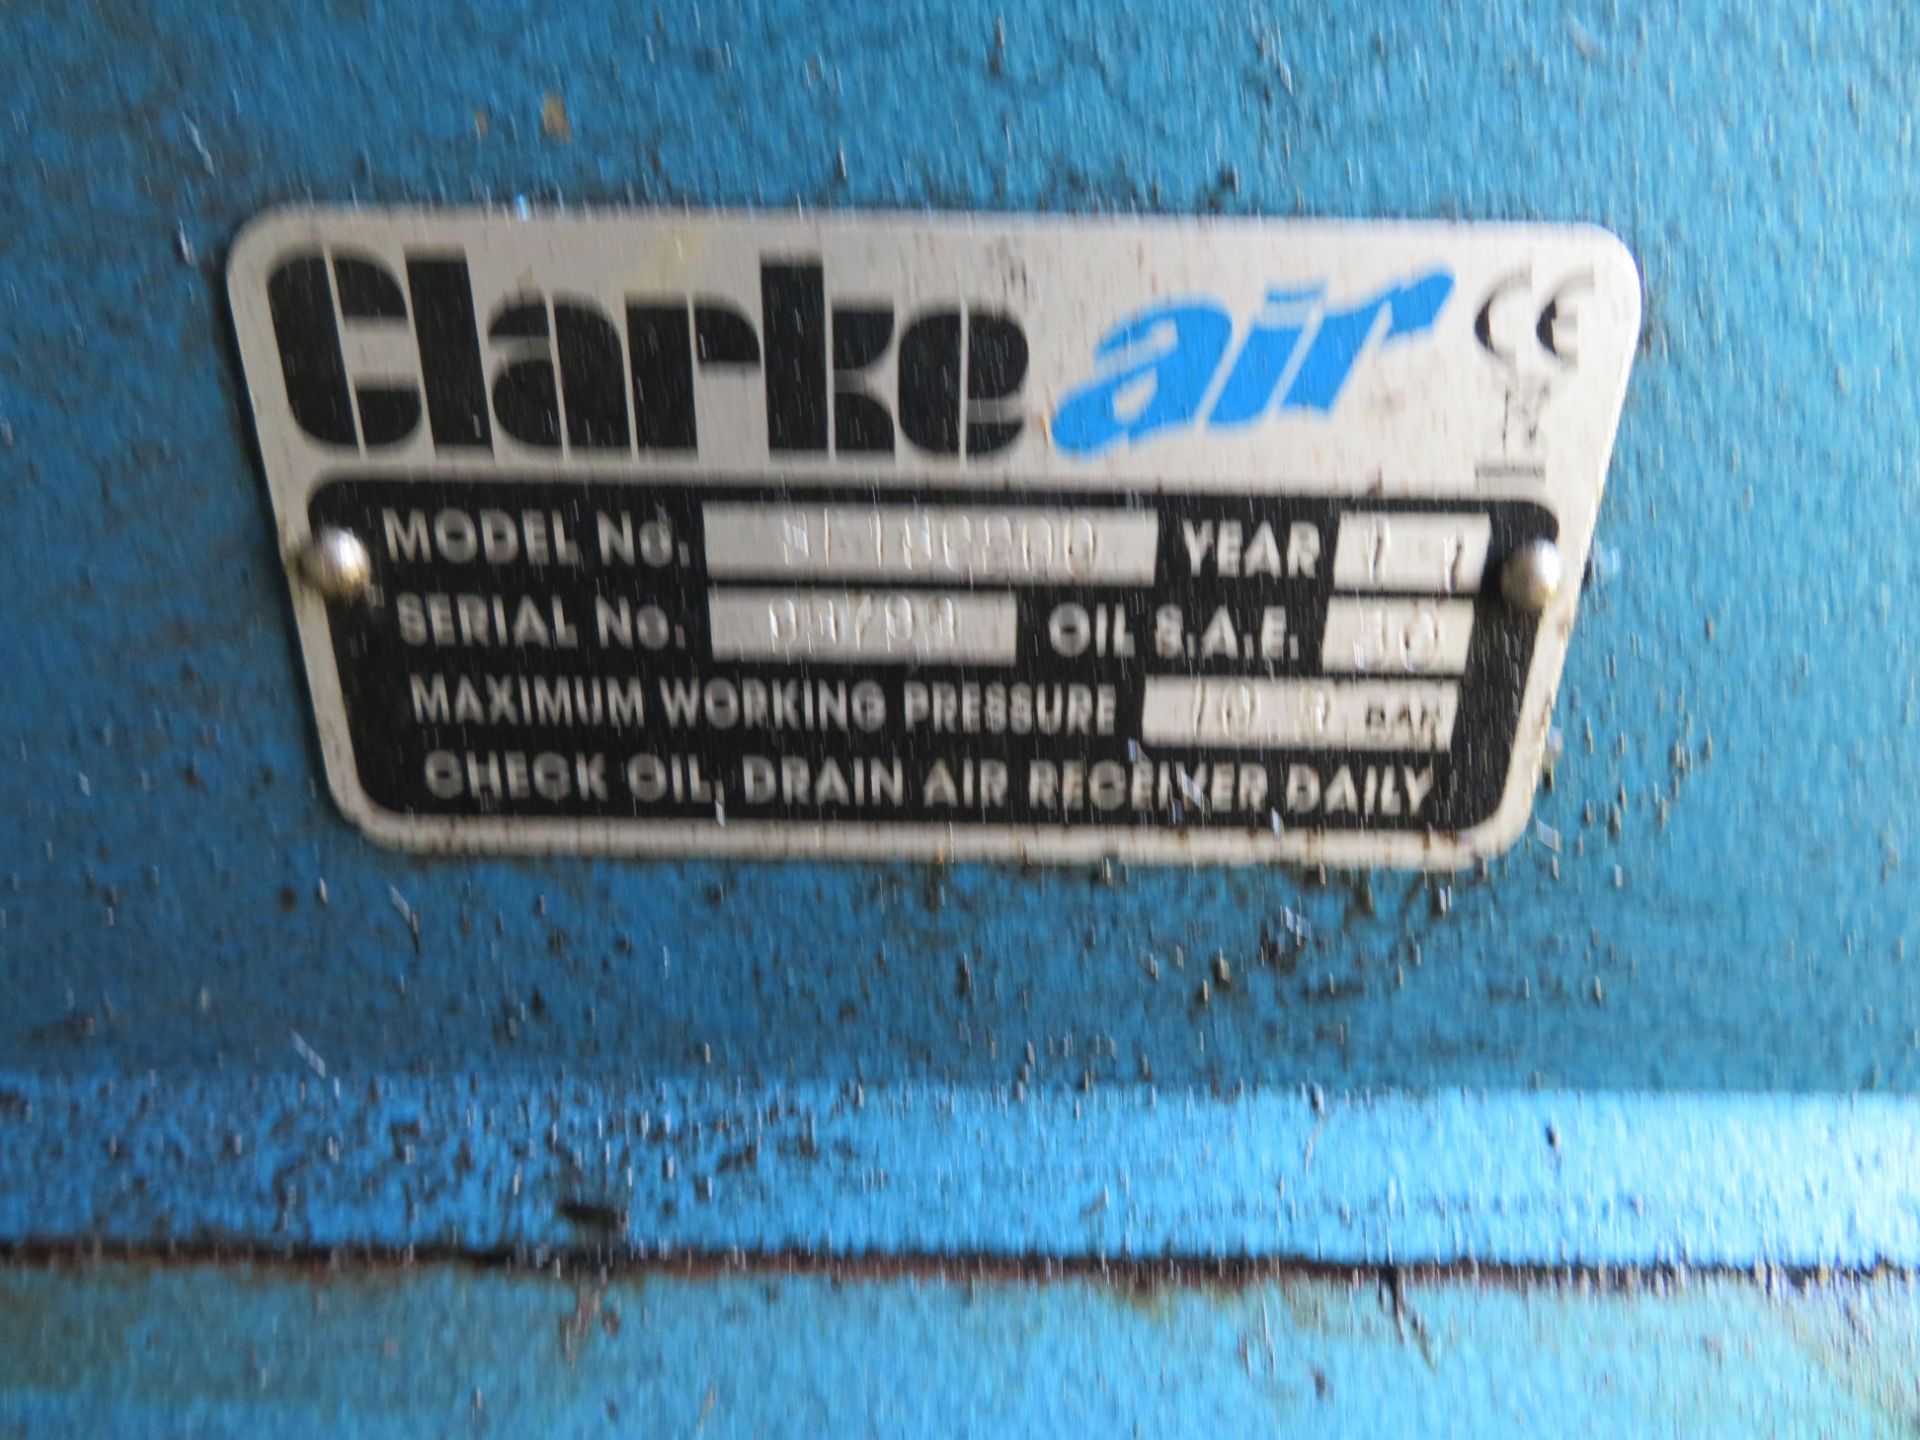 2x Clarke Air Receiver Mounted Compressors - Image 3 of 5